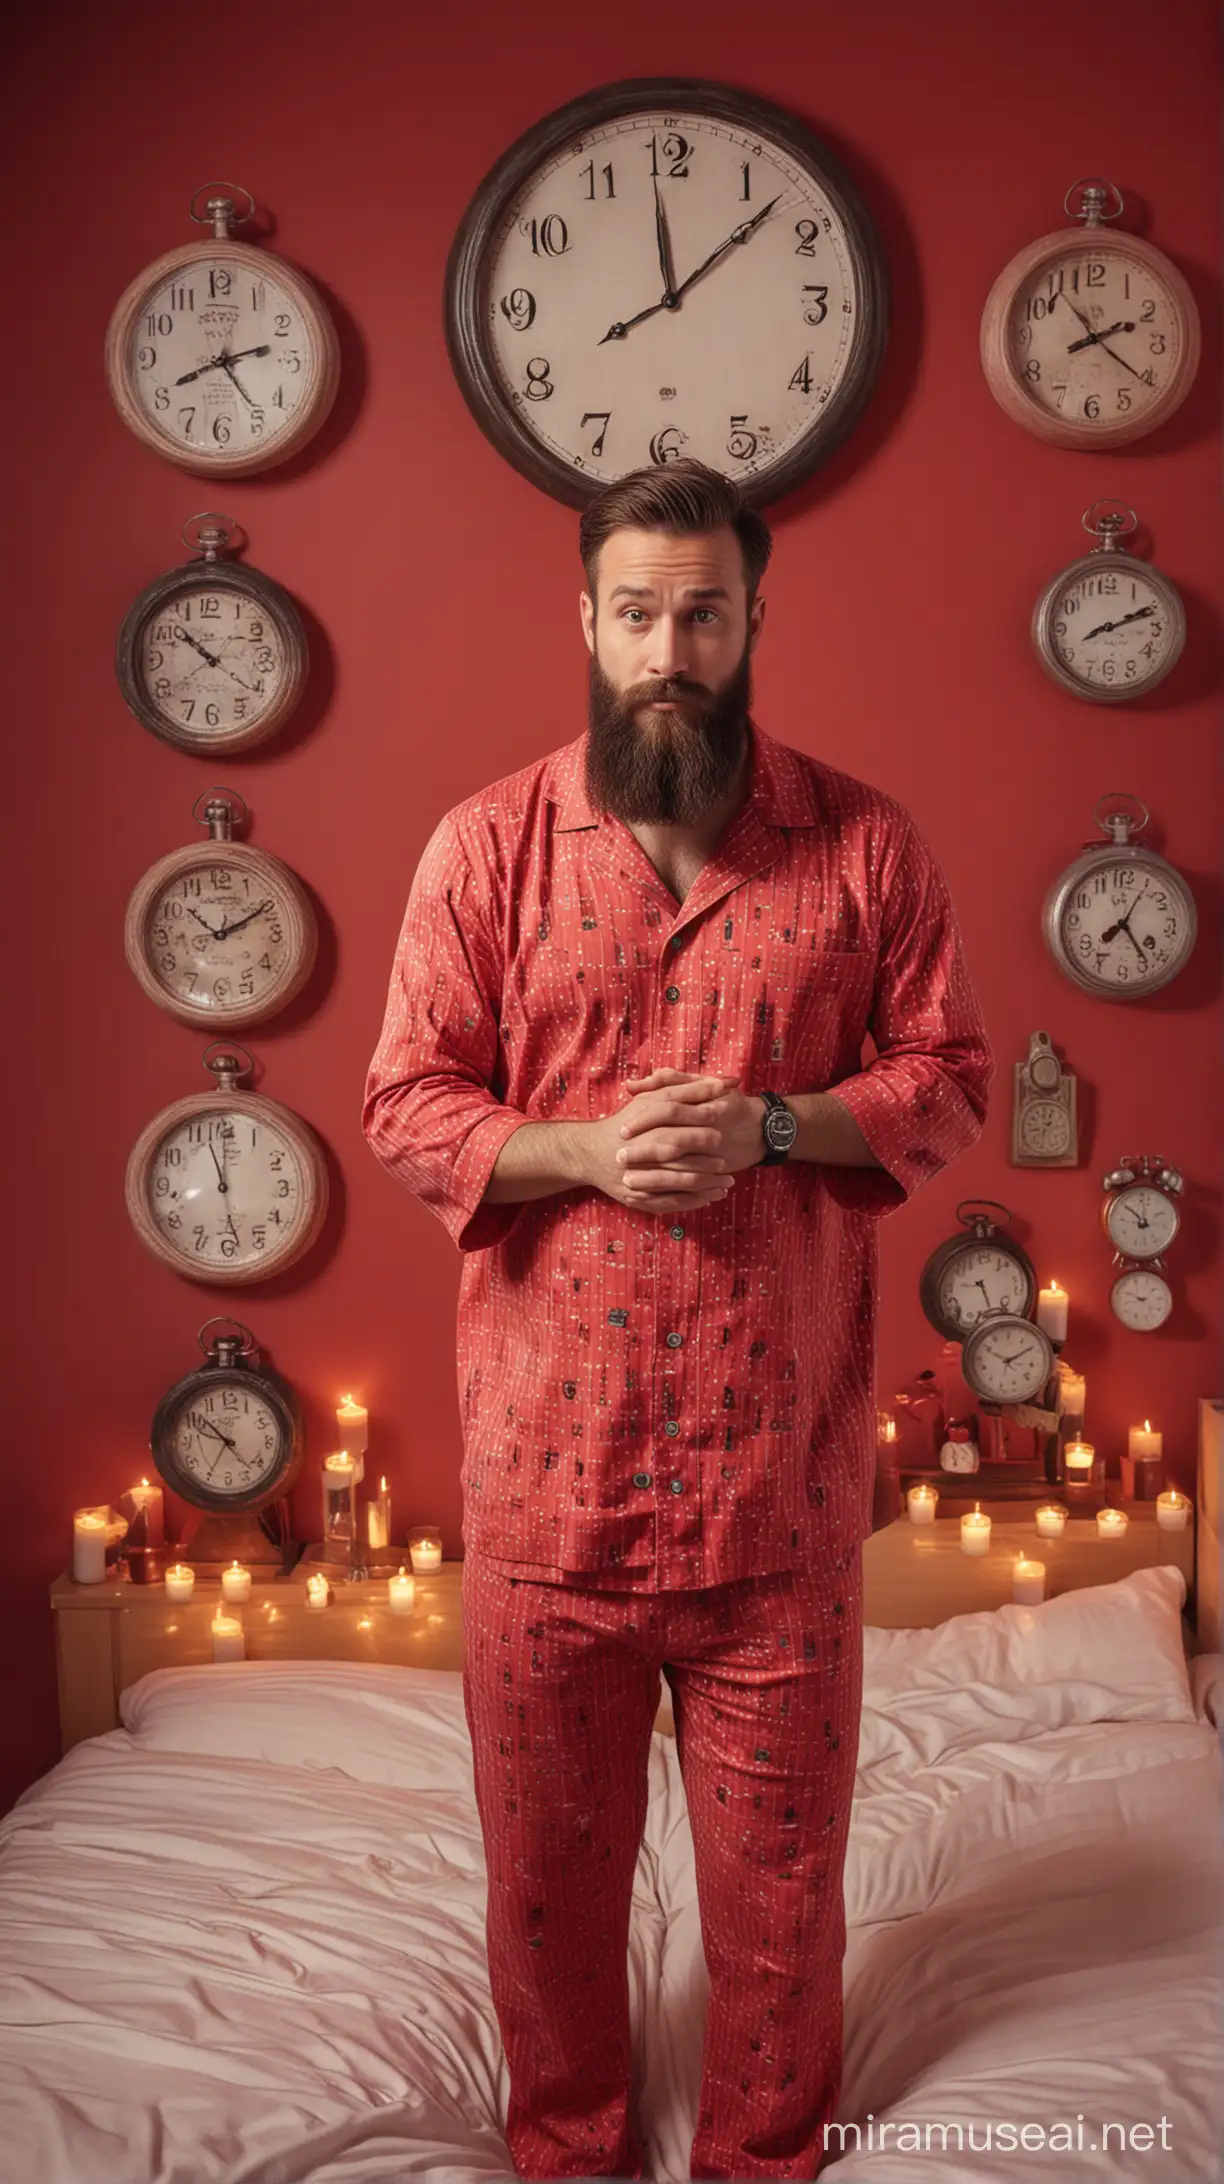 Entrepreneur in Pajamas with Dual Time Watches Amidst Candlelit Clockfilled Bedroom